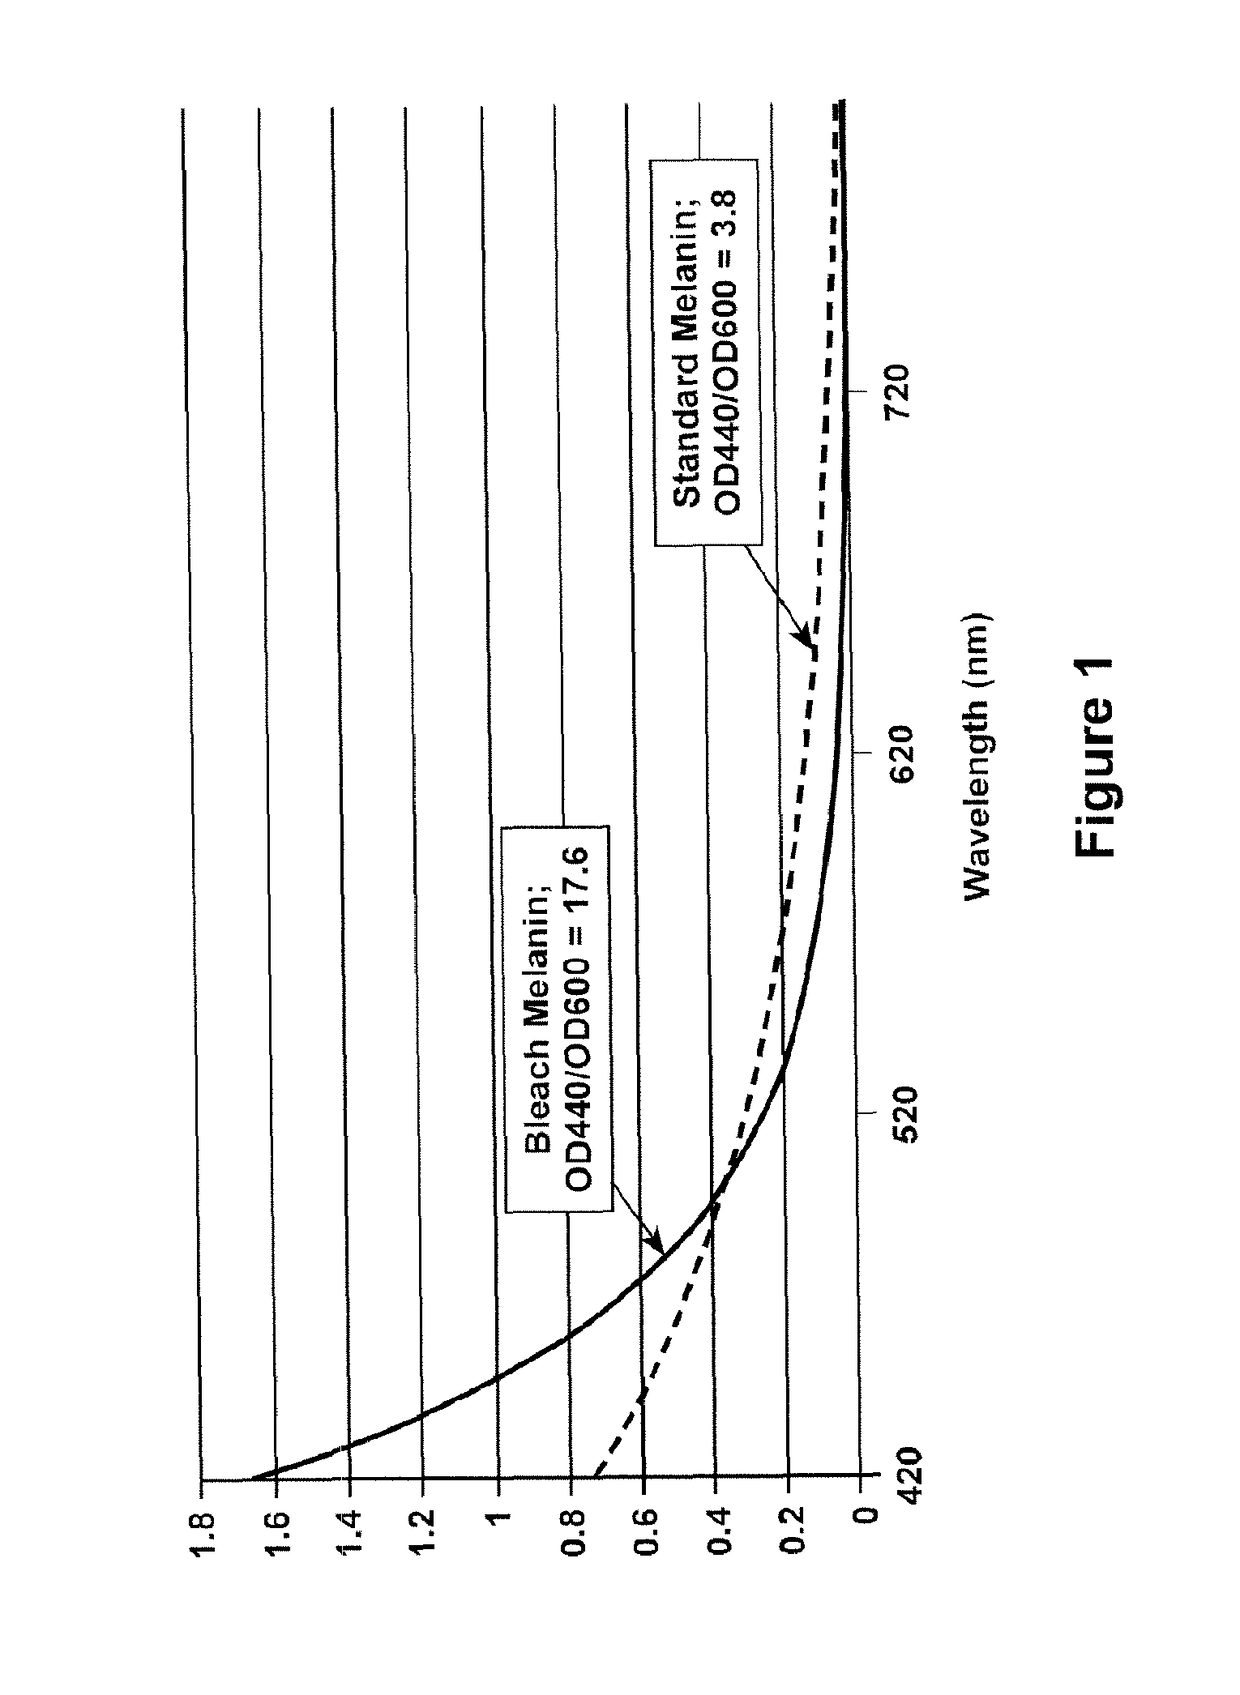 Compound, composition, and method for protecting skin from high energy visible light